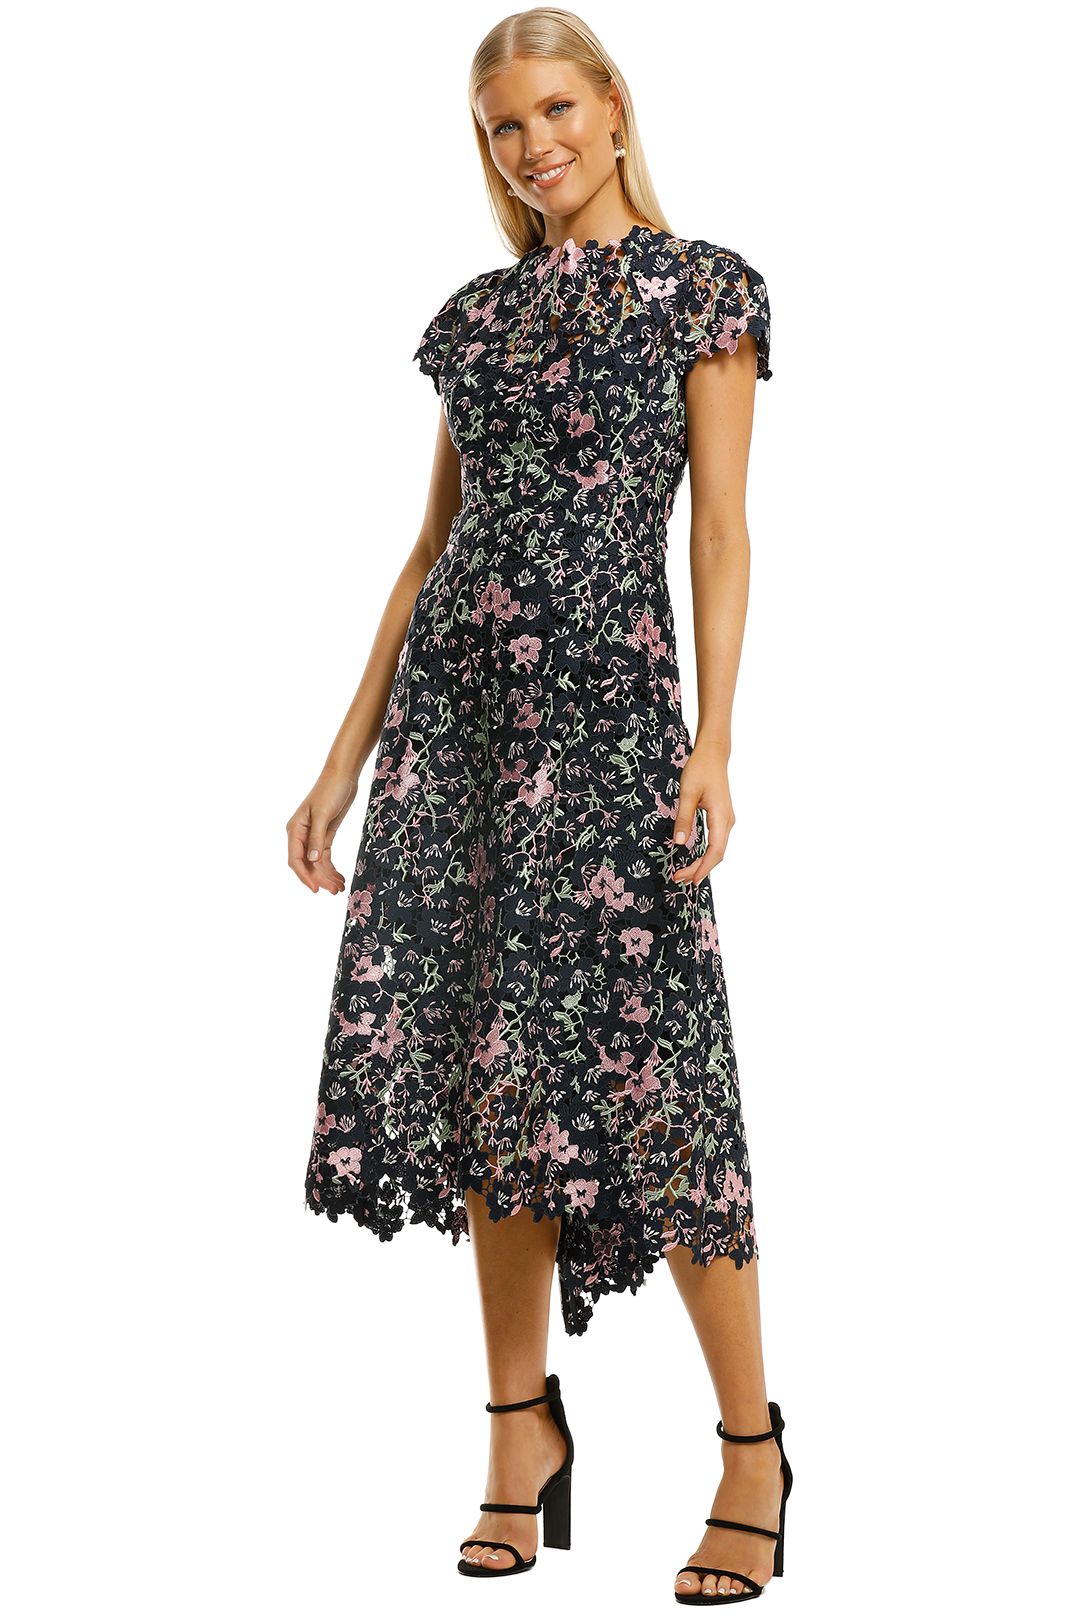 Moss-and-Spy-Birdy-Dress-Floral-Front